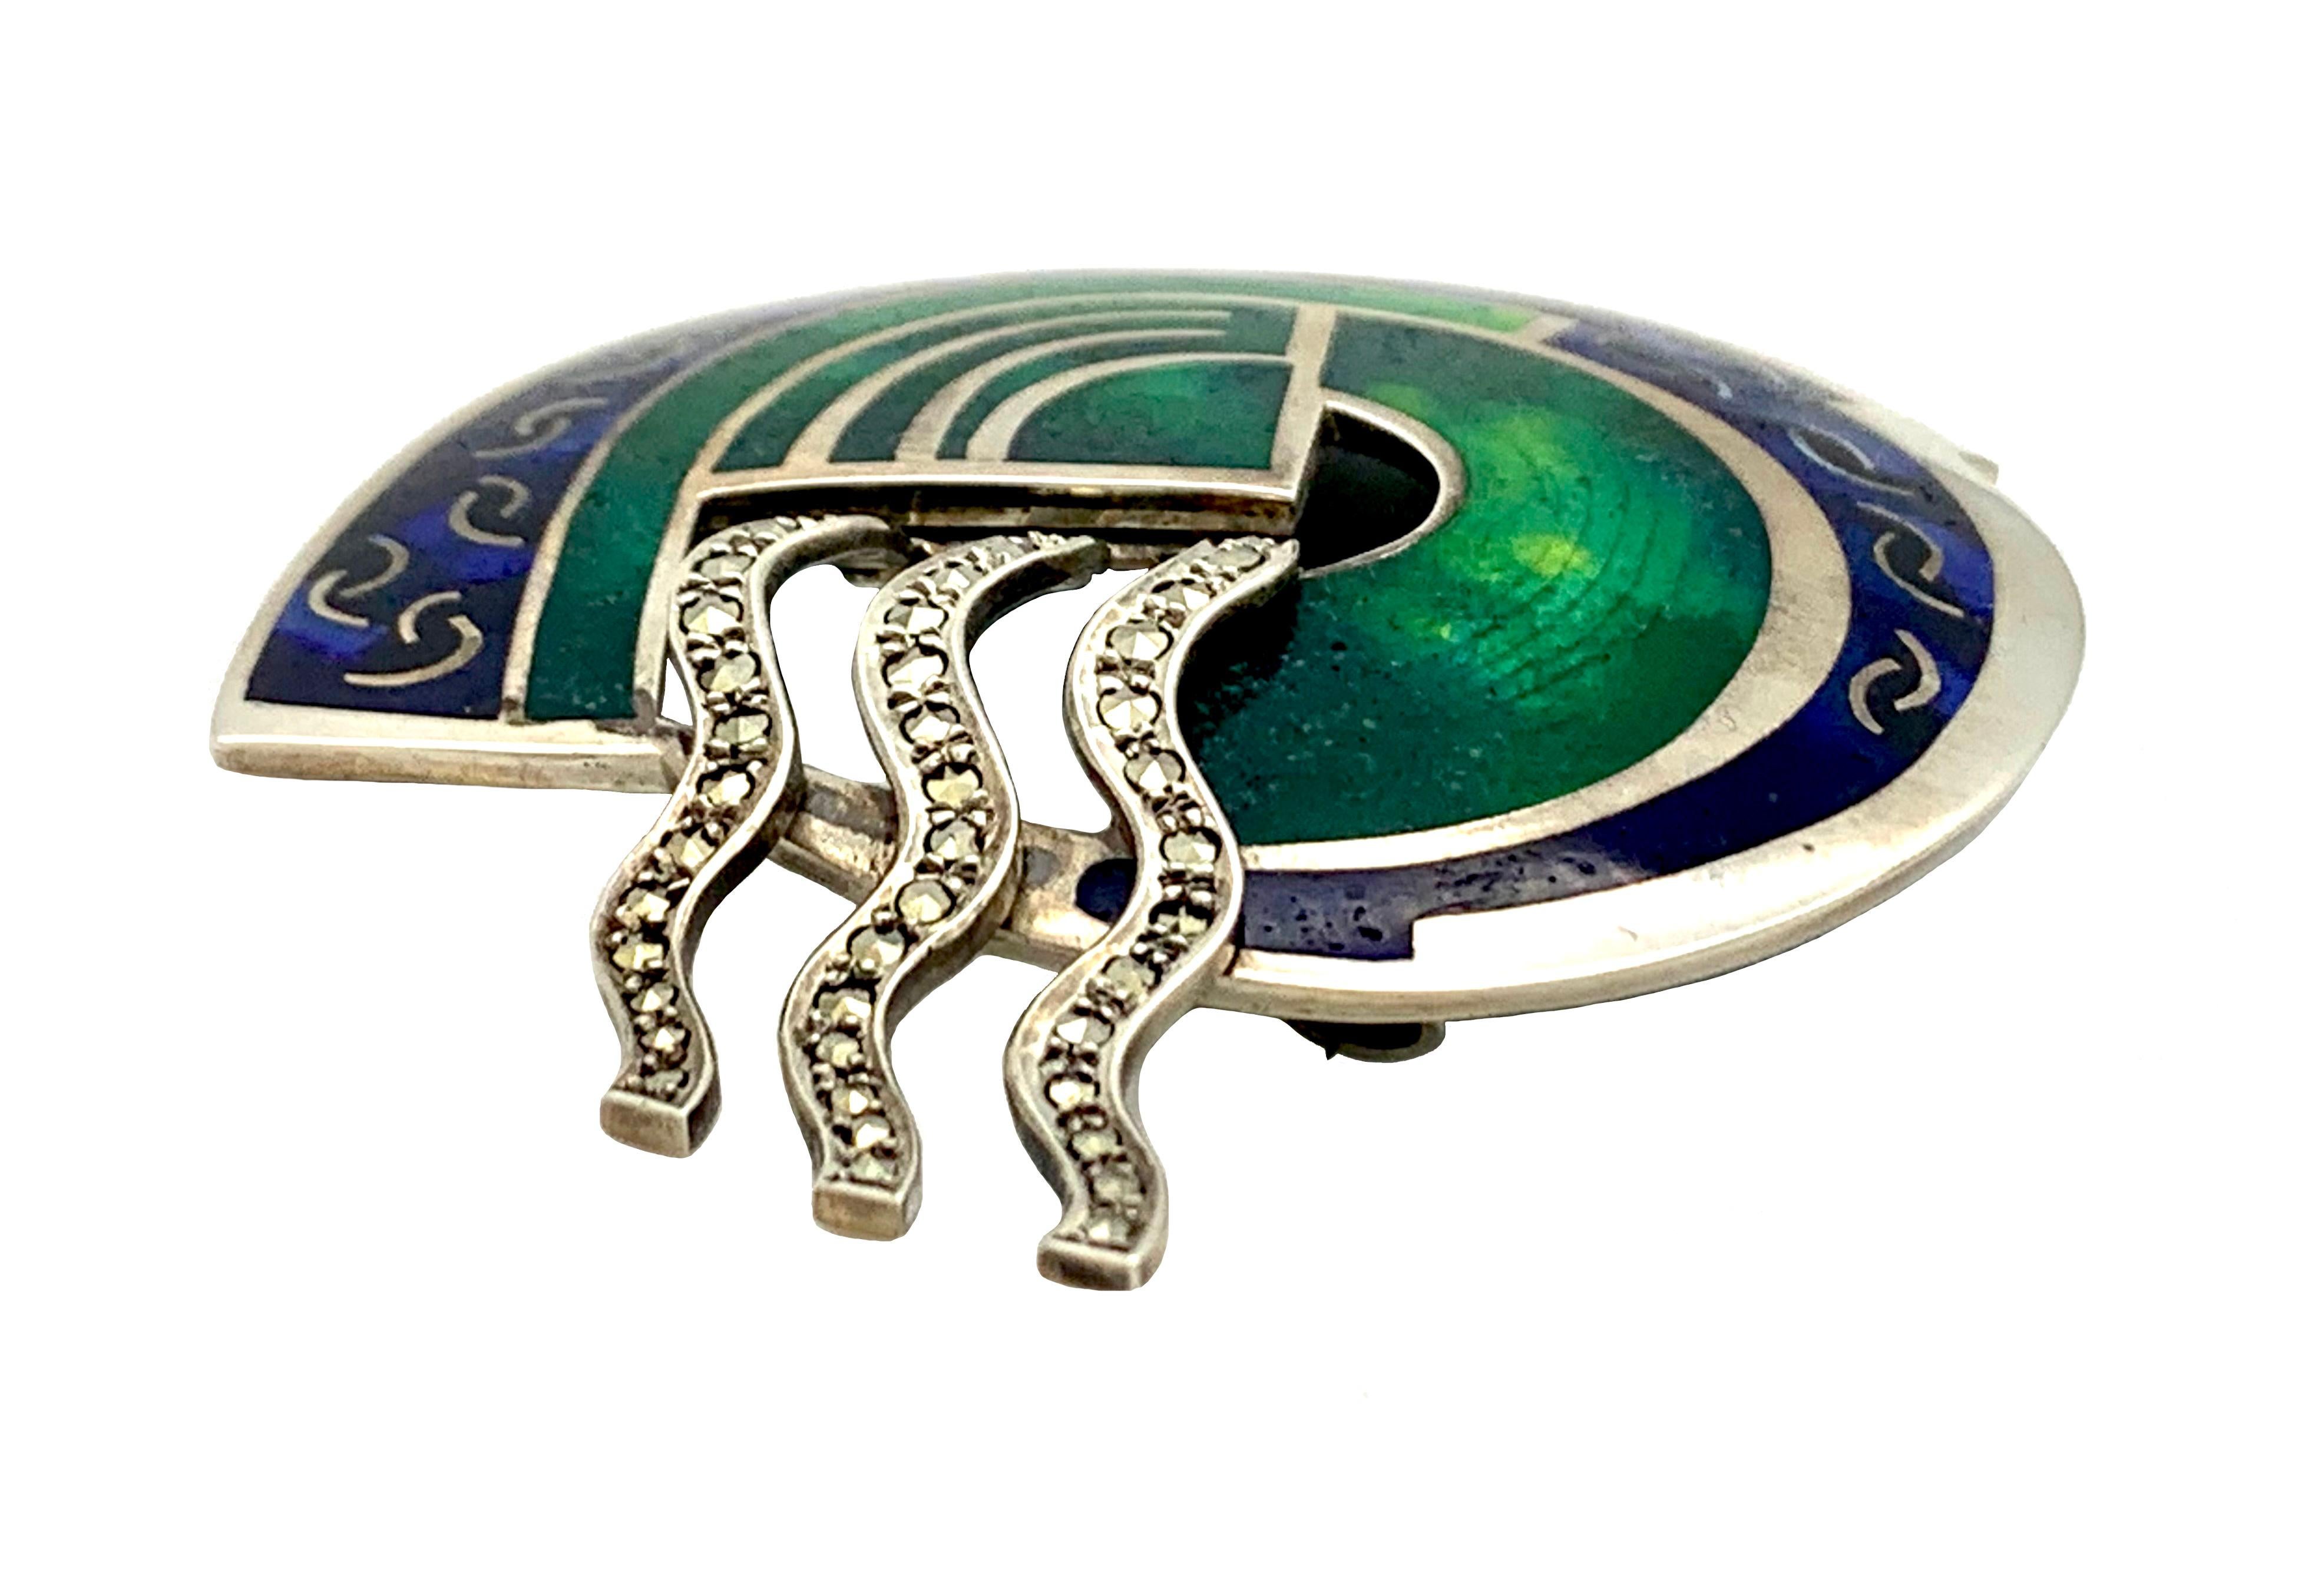 21st Century Sterling Silver Brooch Polychrome Enamel Marcasite In Good Condition For Sale In Munich, Bavaria